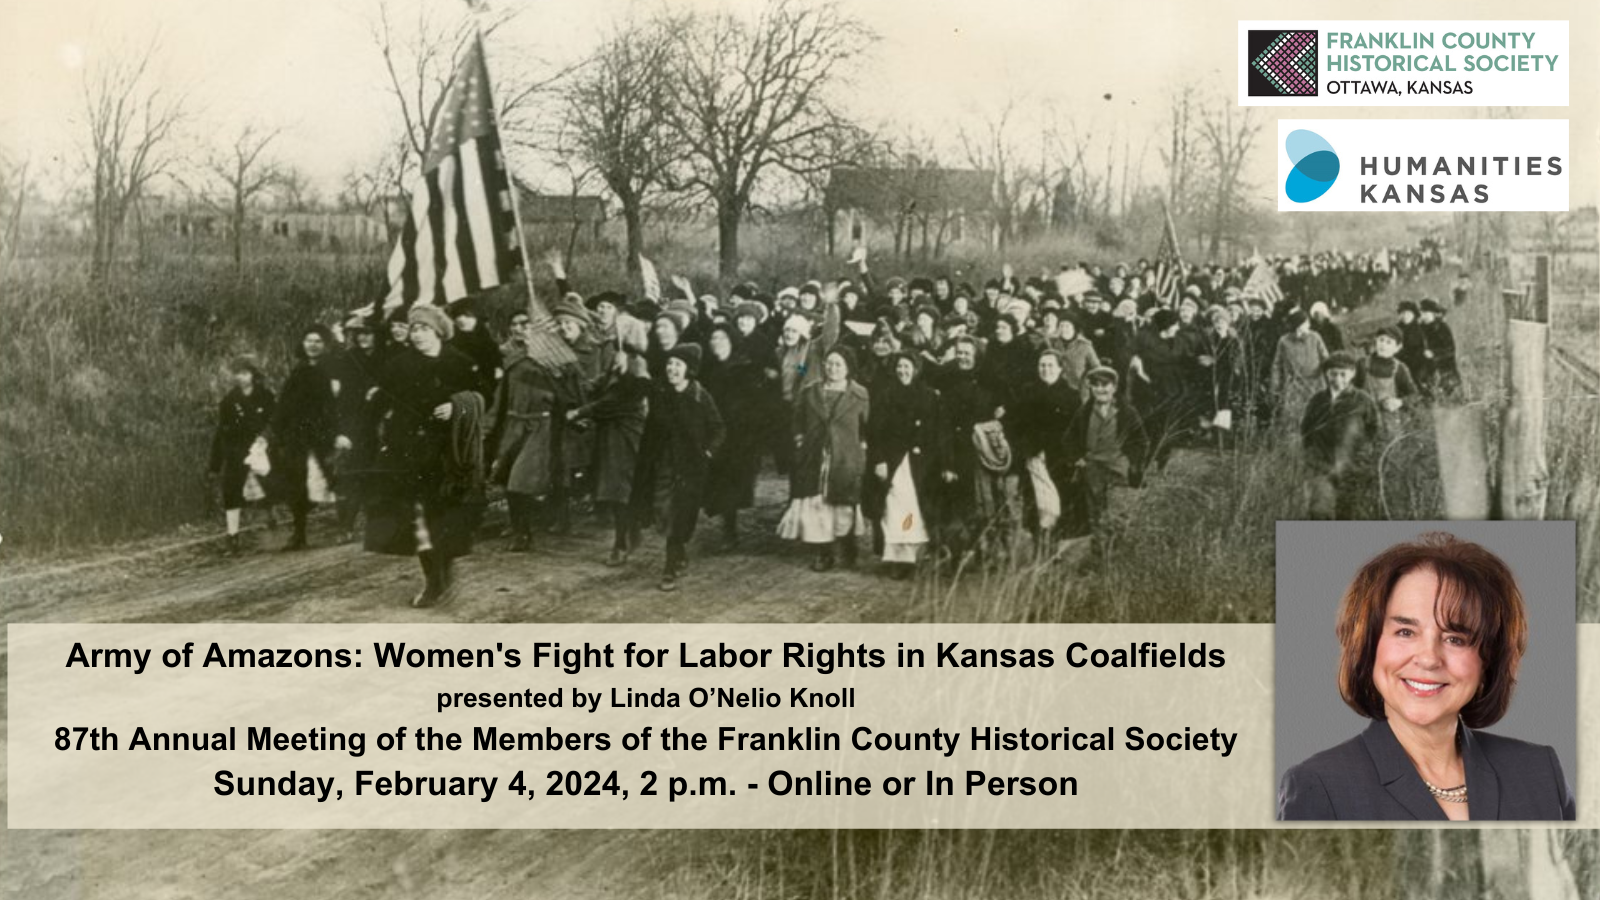 Women and children dressed in winter clothes march along a dirt road. One woman carries a large American flag. Humanities Kansas logo. Franklin County Historical Society logo. Text: Army of Amazons: Women's Fight for Labor Rights in Kansas Coalfields, 87th Annual Meeting of the Members of the Franklin County Historical Society, presented by Linda O'Nelio Knoll, Sunday February 4, 2024, 2 p.m. In person or online. Inset image: a portrait of a woman with chin-length brown hair.